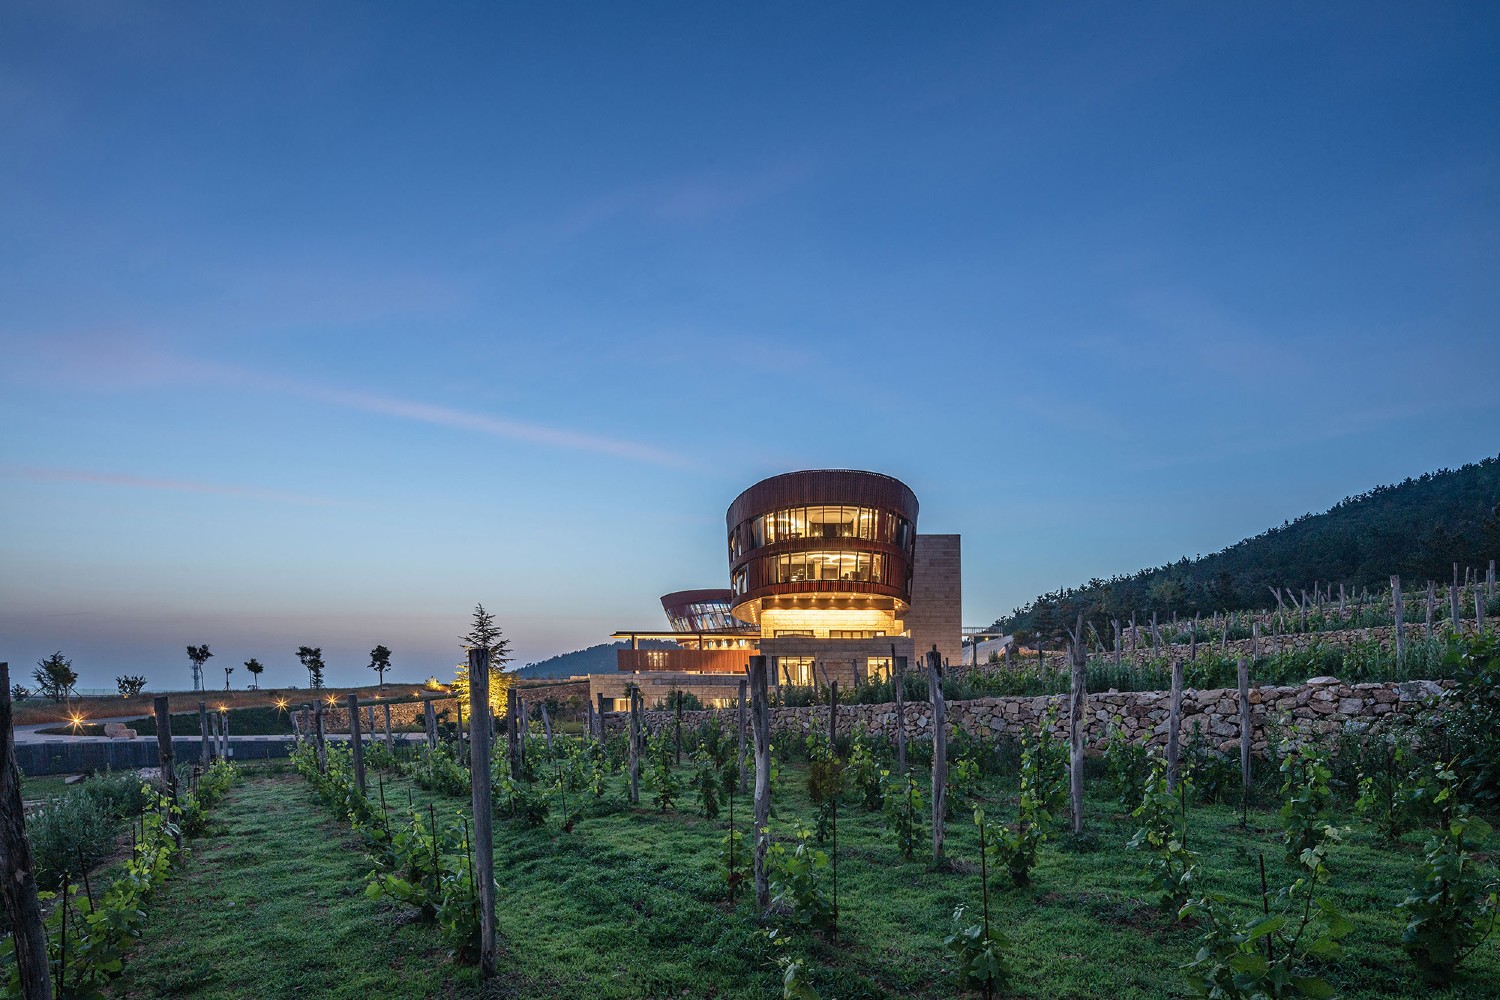  Runaway Cow Winery Retreat: The Gold List 2021 - 10 Best Hotels 